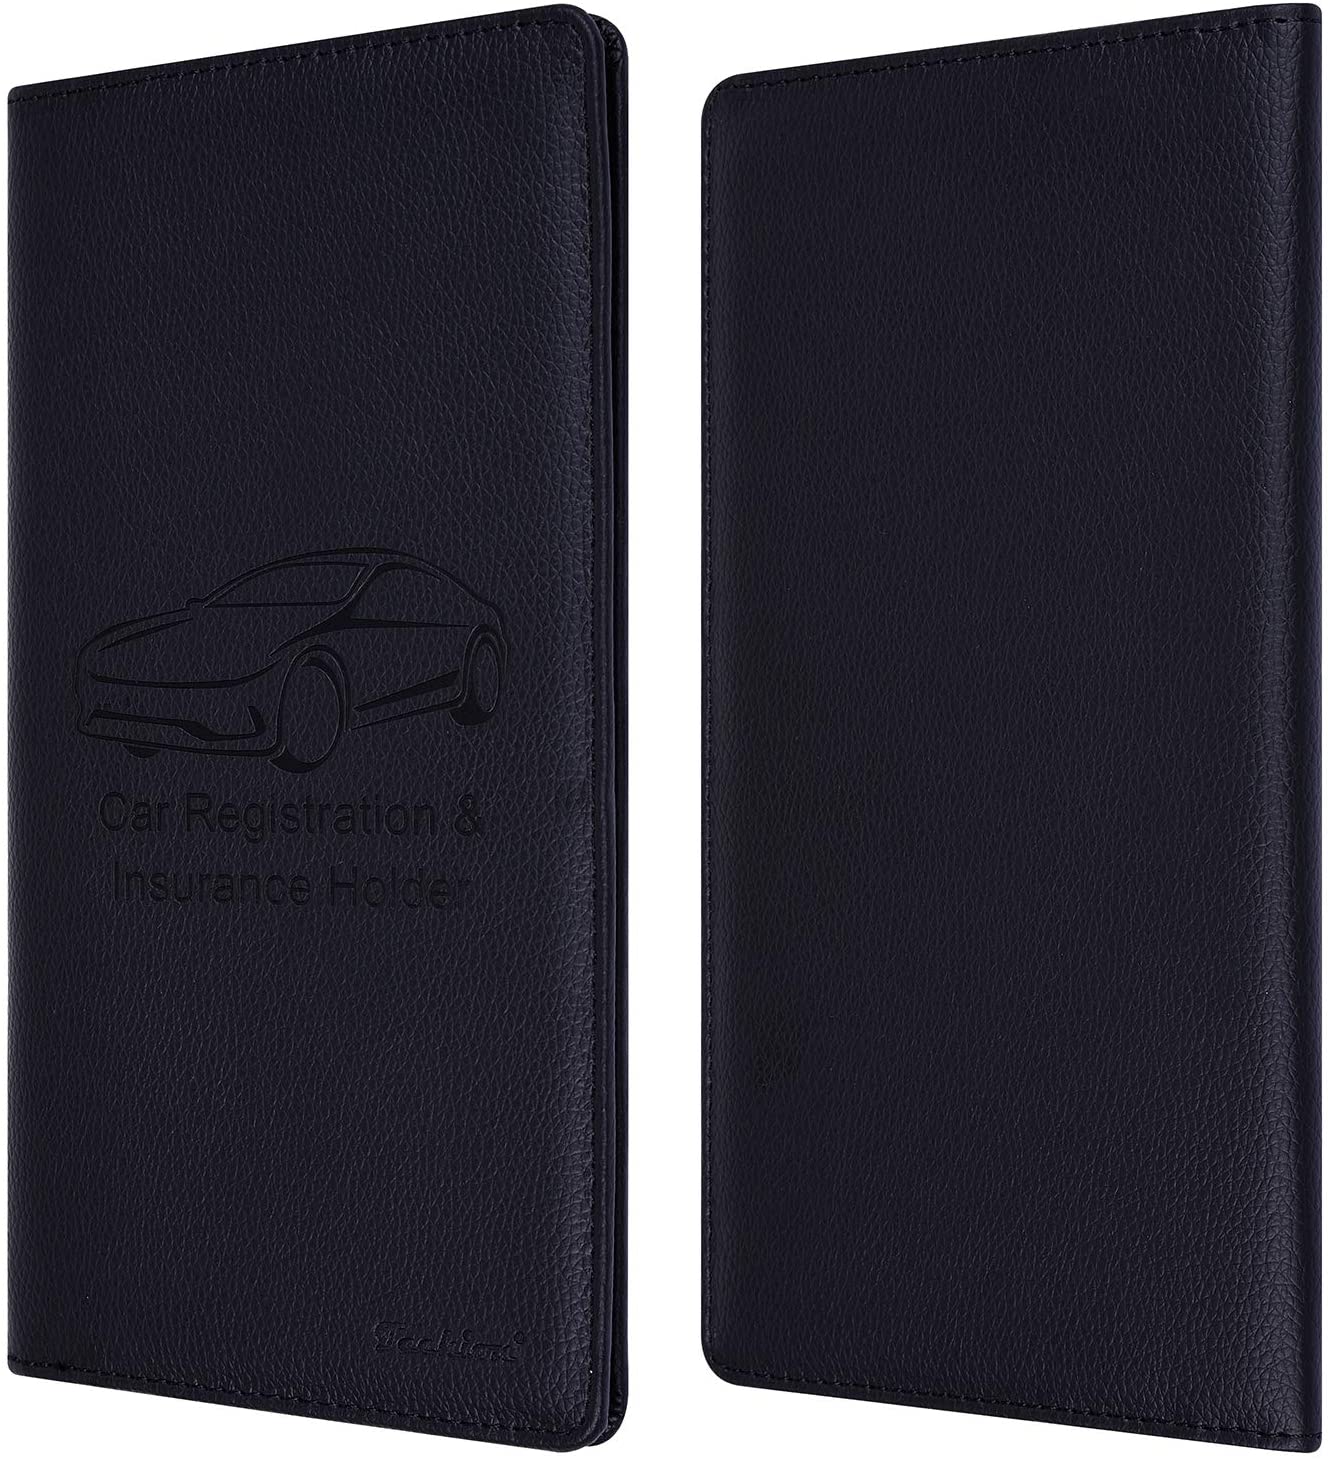 Techion Car Insurance and Registration Holder, 9.5 x 5 Inch PU